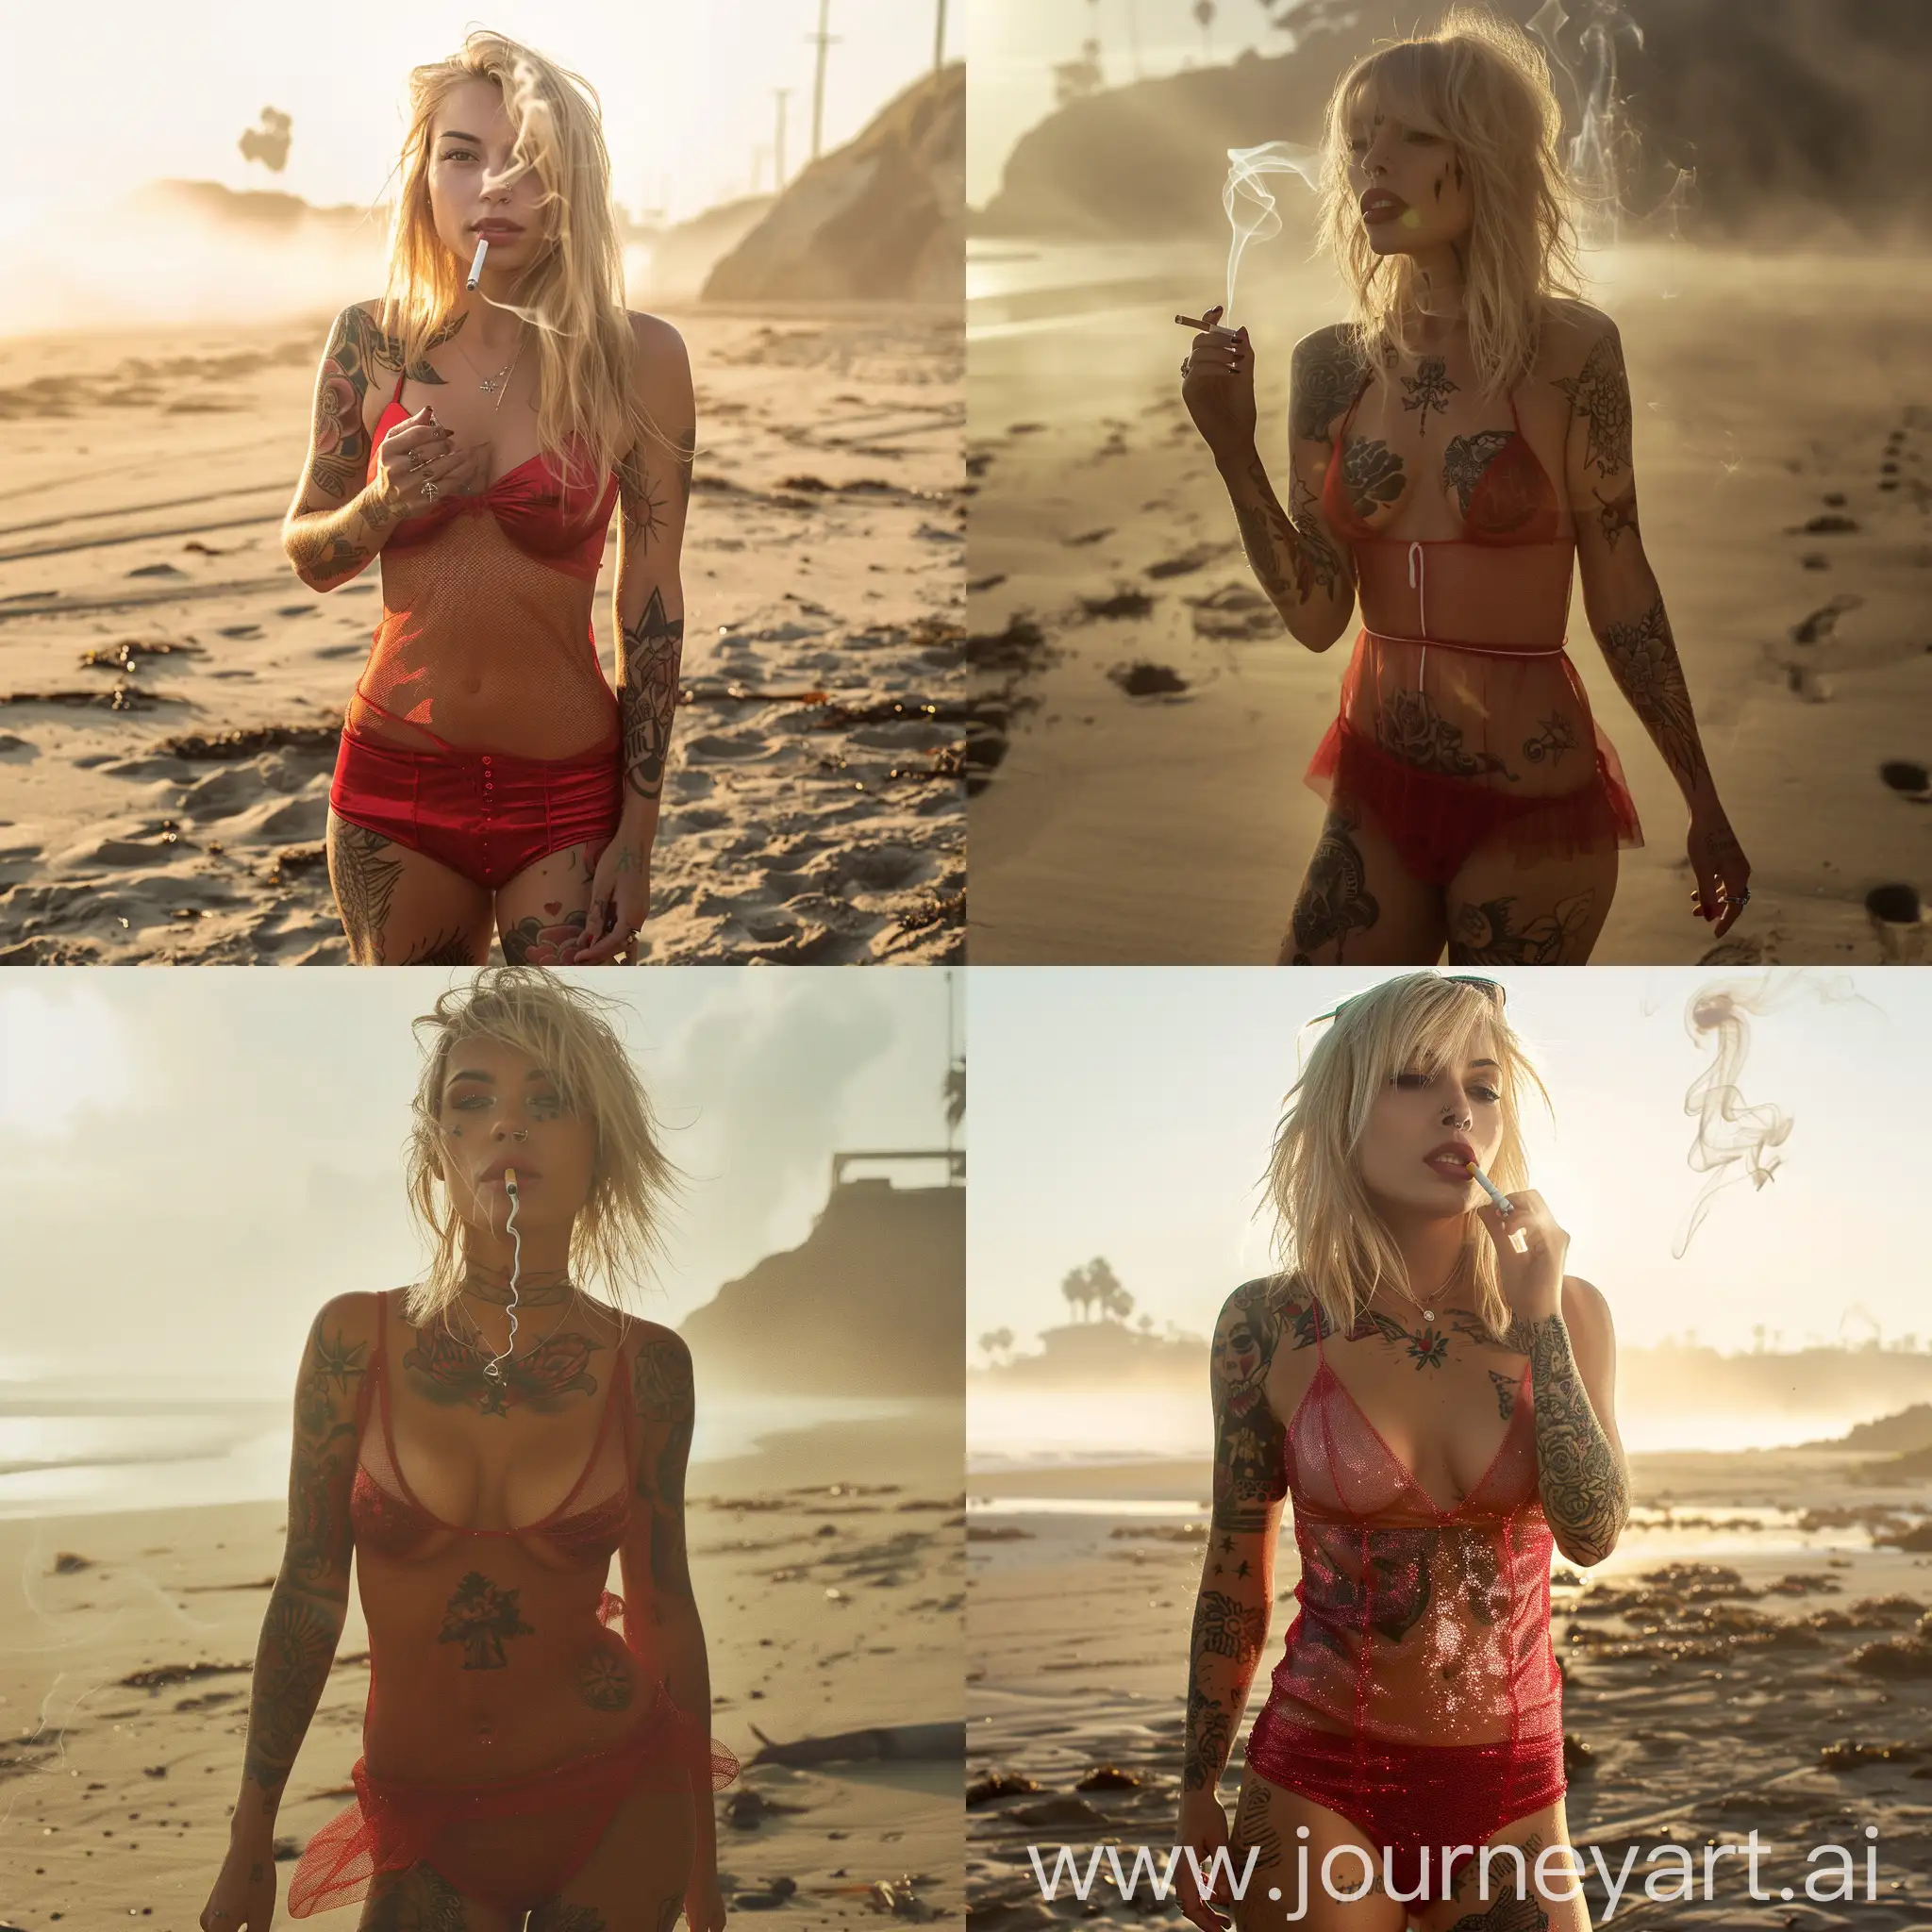 Blonde-Pinup-Model-in-Translucent-Red-Dress-on-Foggy-Beach